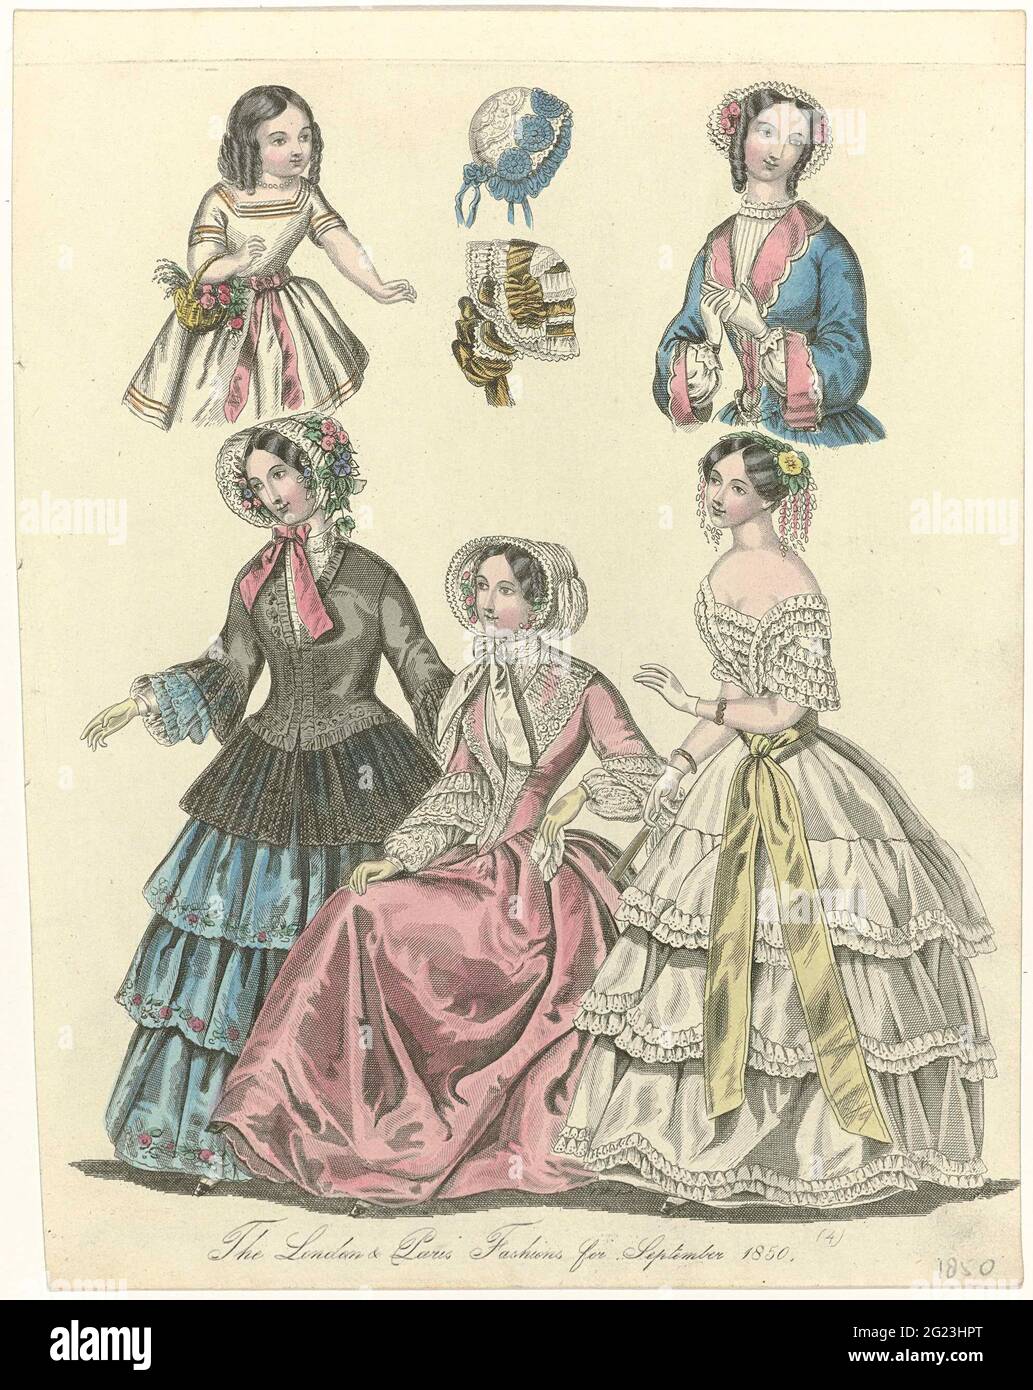 The World Of Fashion, September 1850: The London & Paris Fashions (...).  Modes for September 1850 from London and Paris. Jacket on a skirt with  three wrinkled strips fabric with flower pattern.